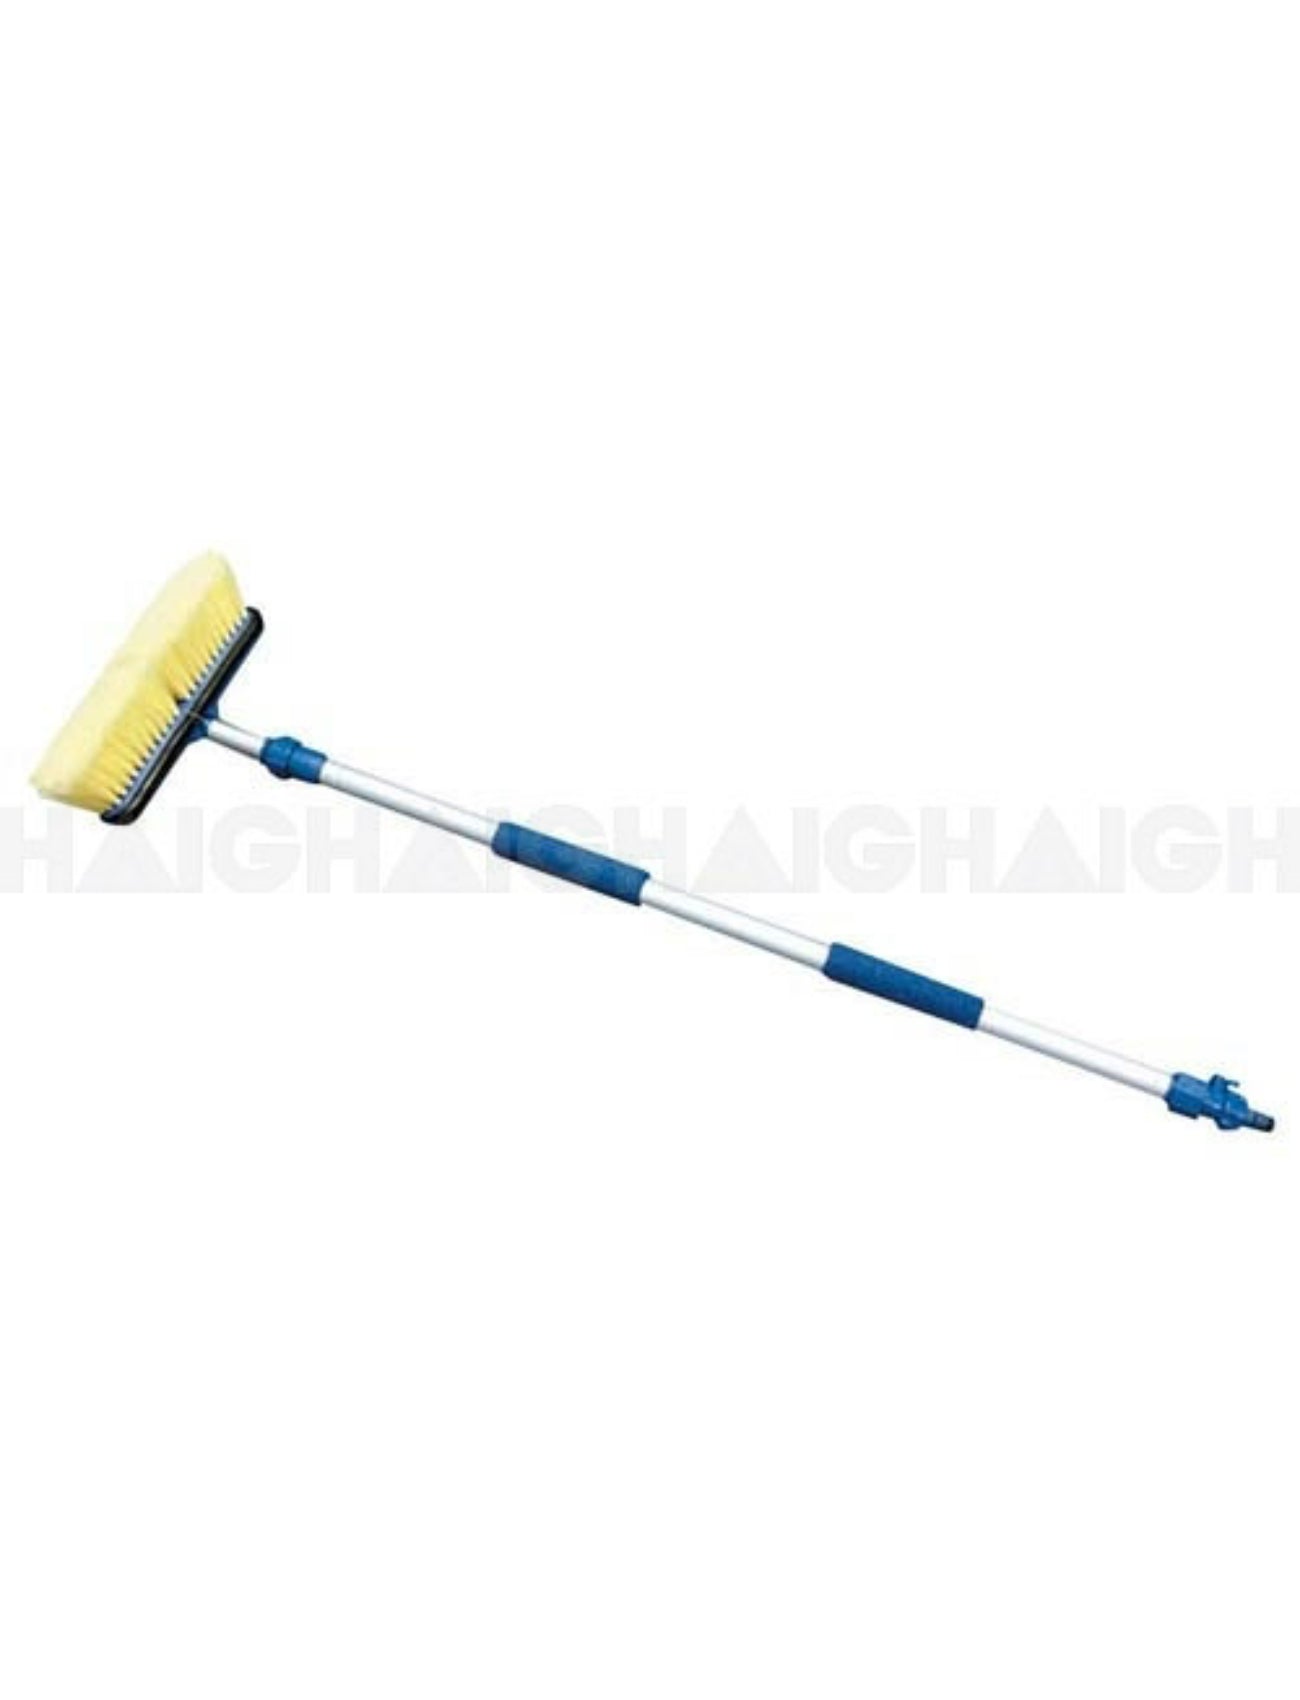 CLEANING BRUSH 1.4 - 2.4m W/EXT HANDLE